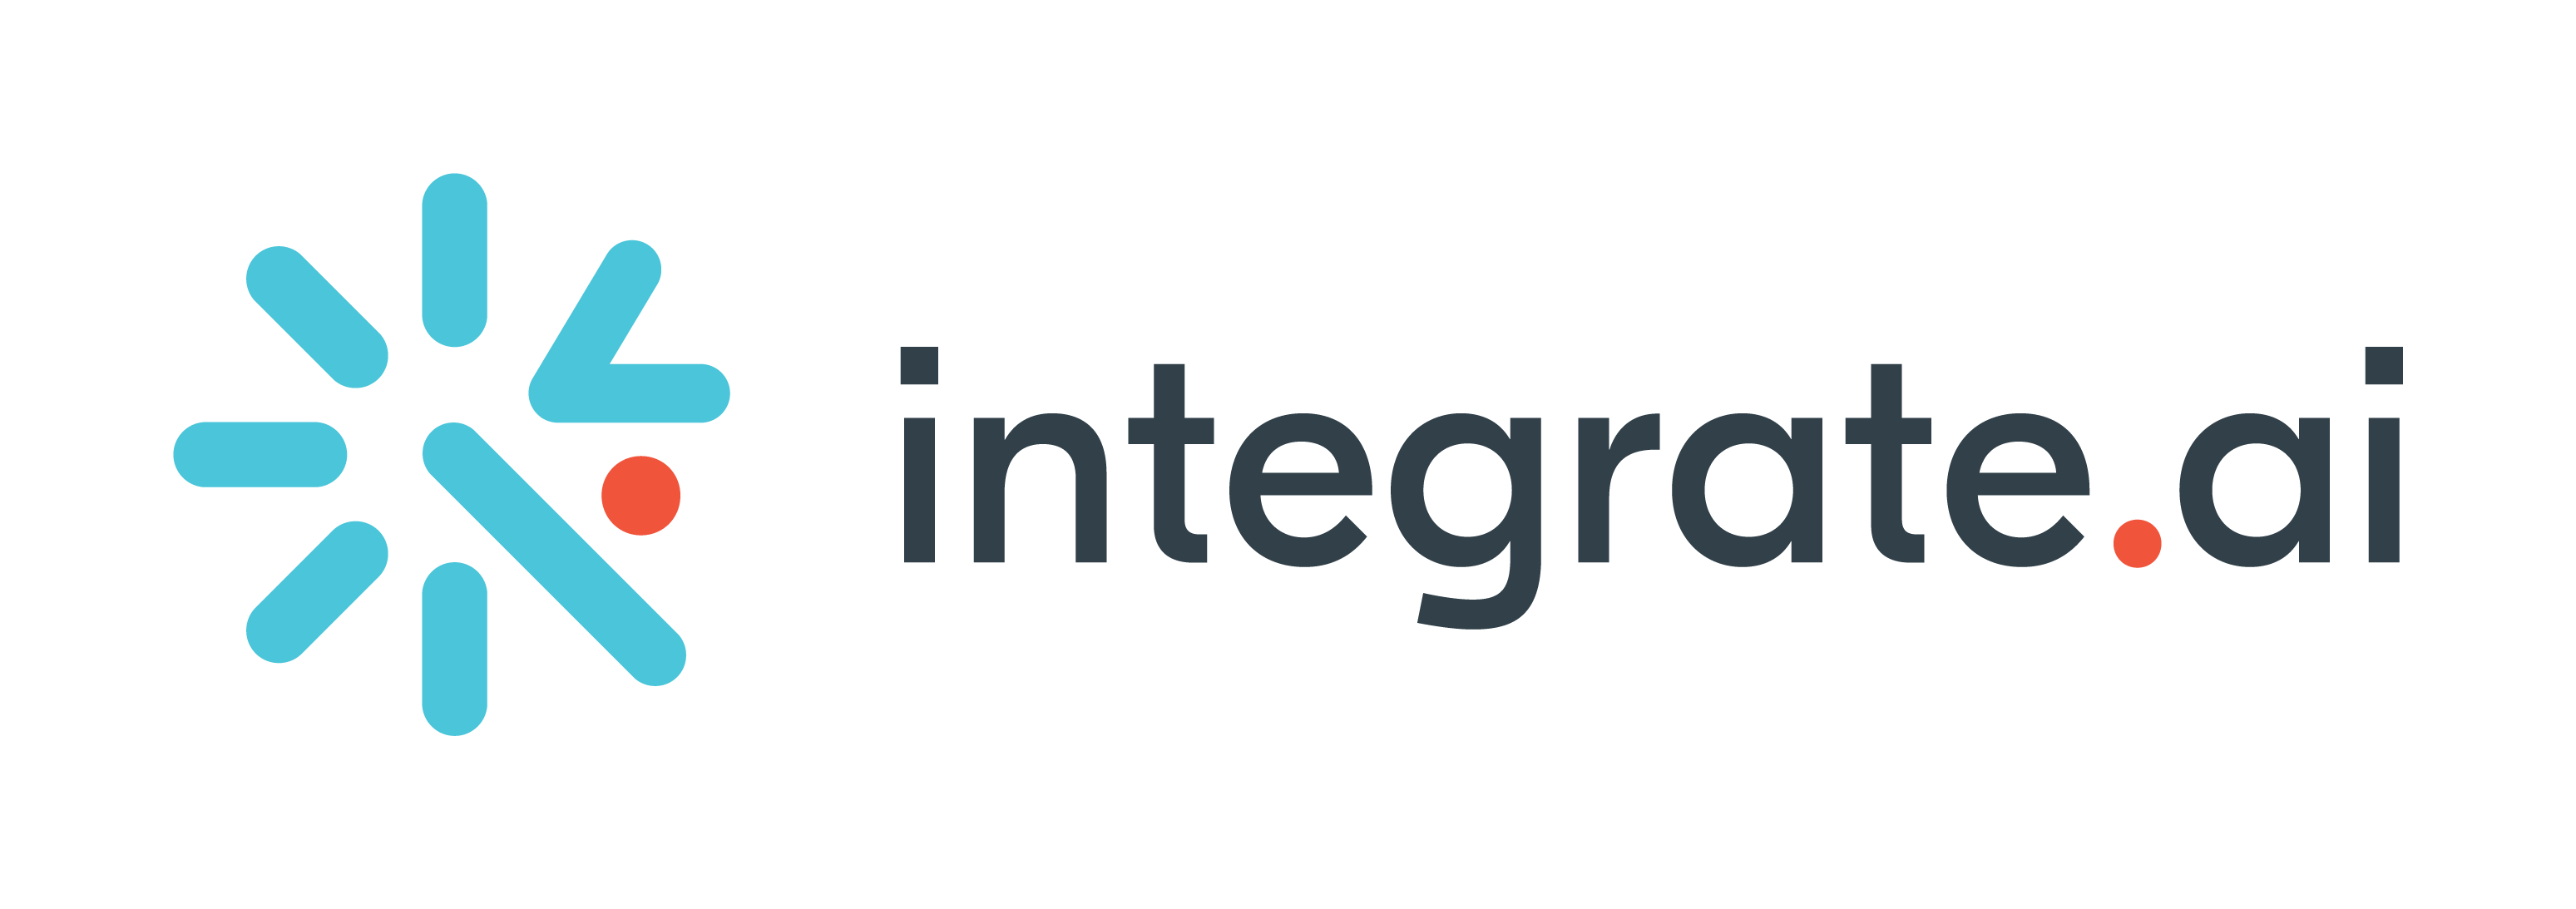 20170726204732_integrate-ai-icon-wordmark-primary.png